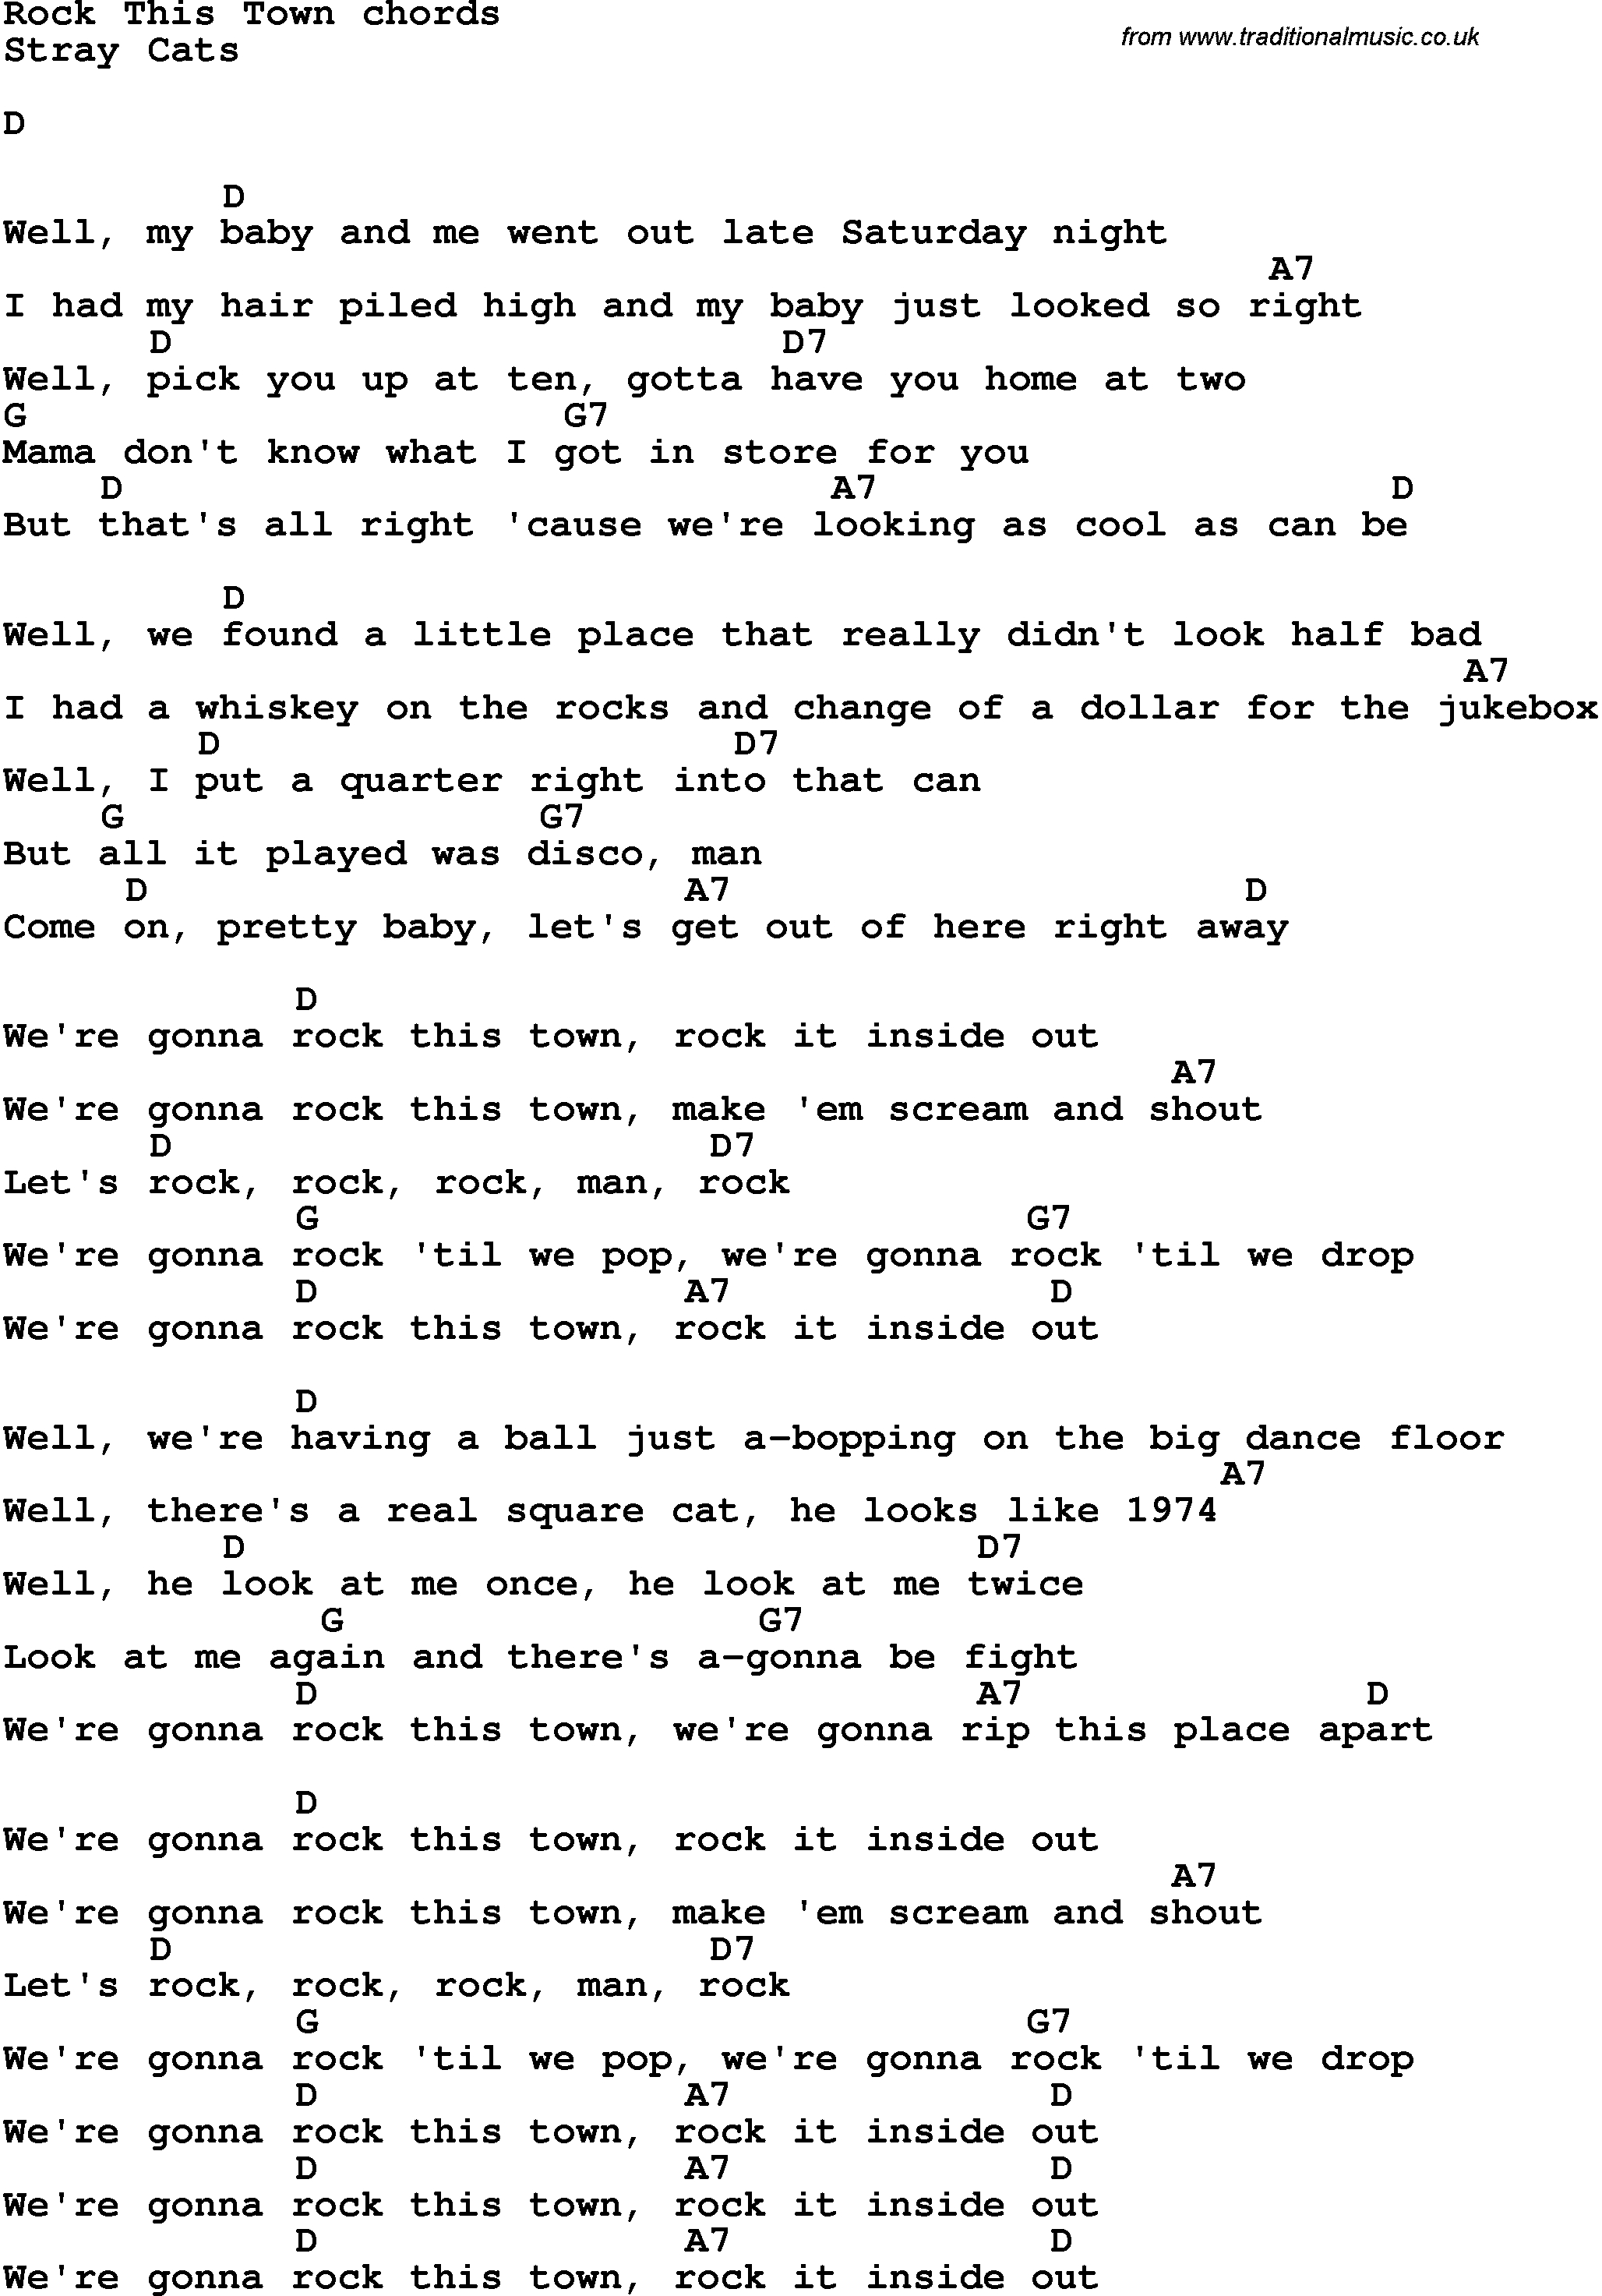 From The Inside Out Chords Song Lyrics With Guitar Chords For Rock This Town